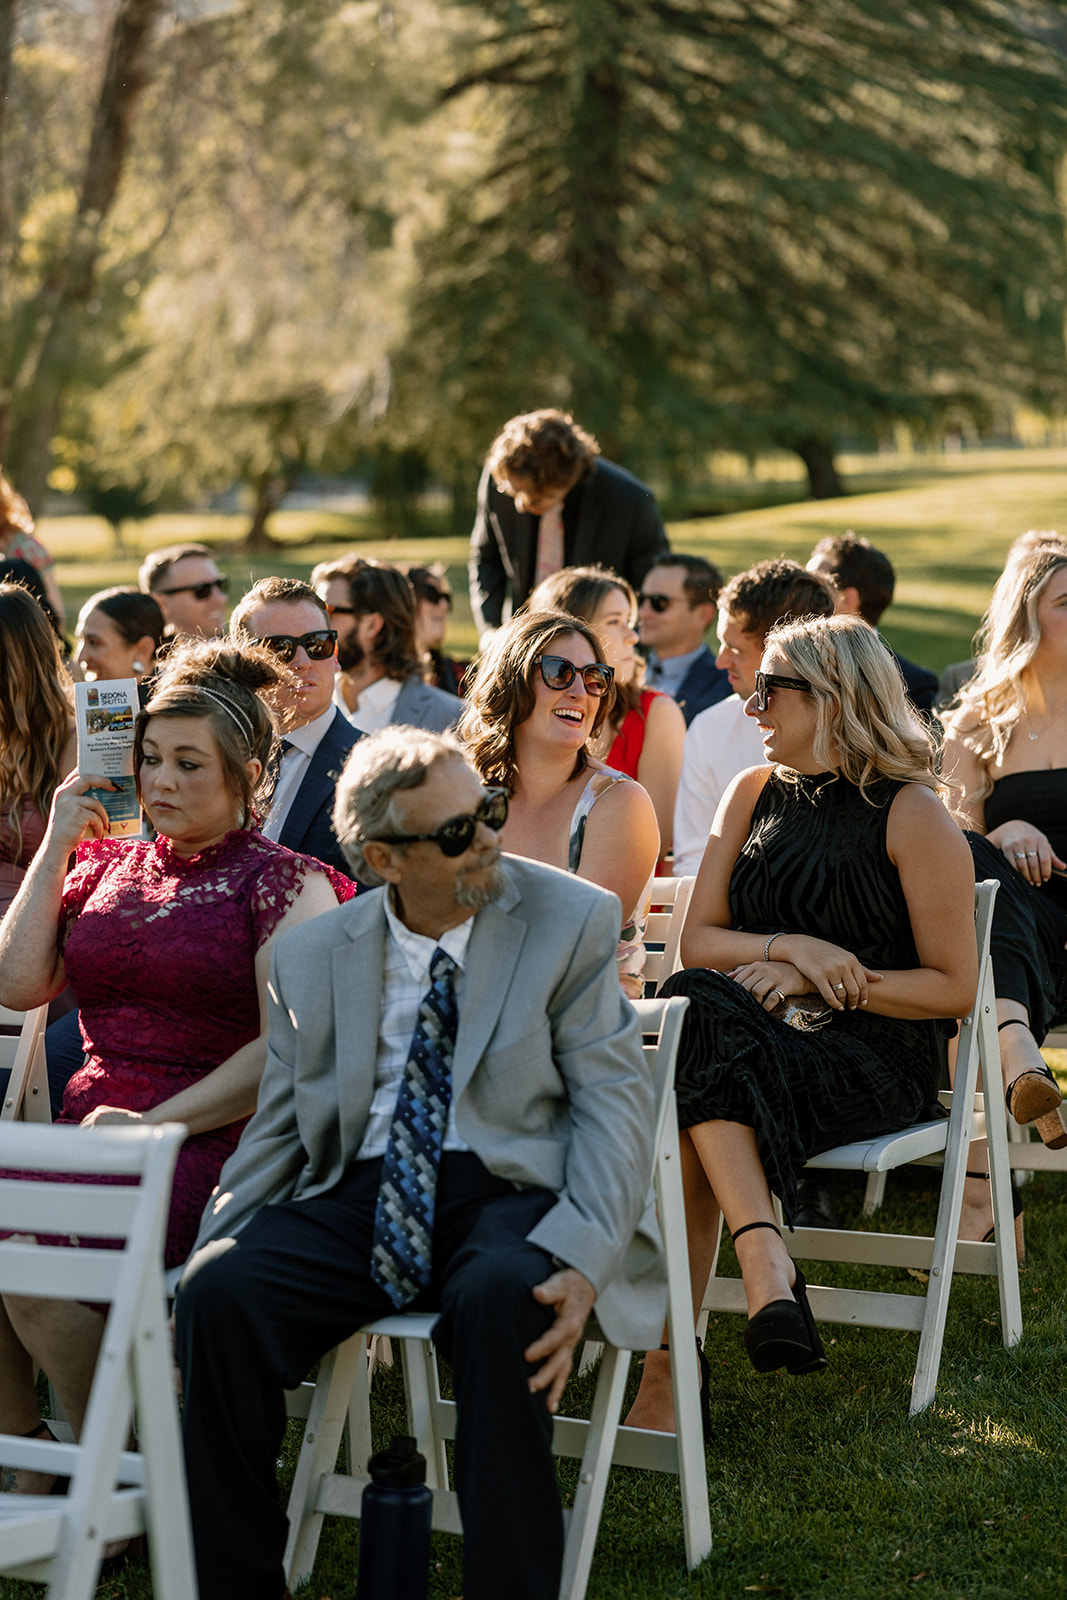 Guests anxiously look on as the stunning Arizona wedding ceremony unfolds